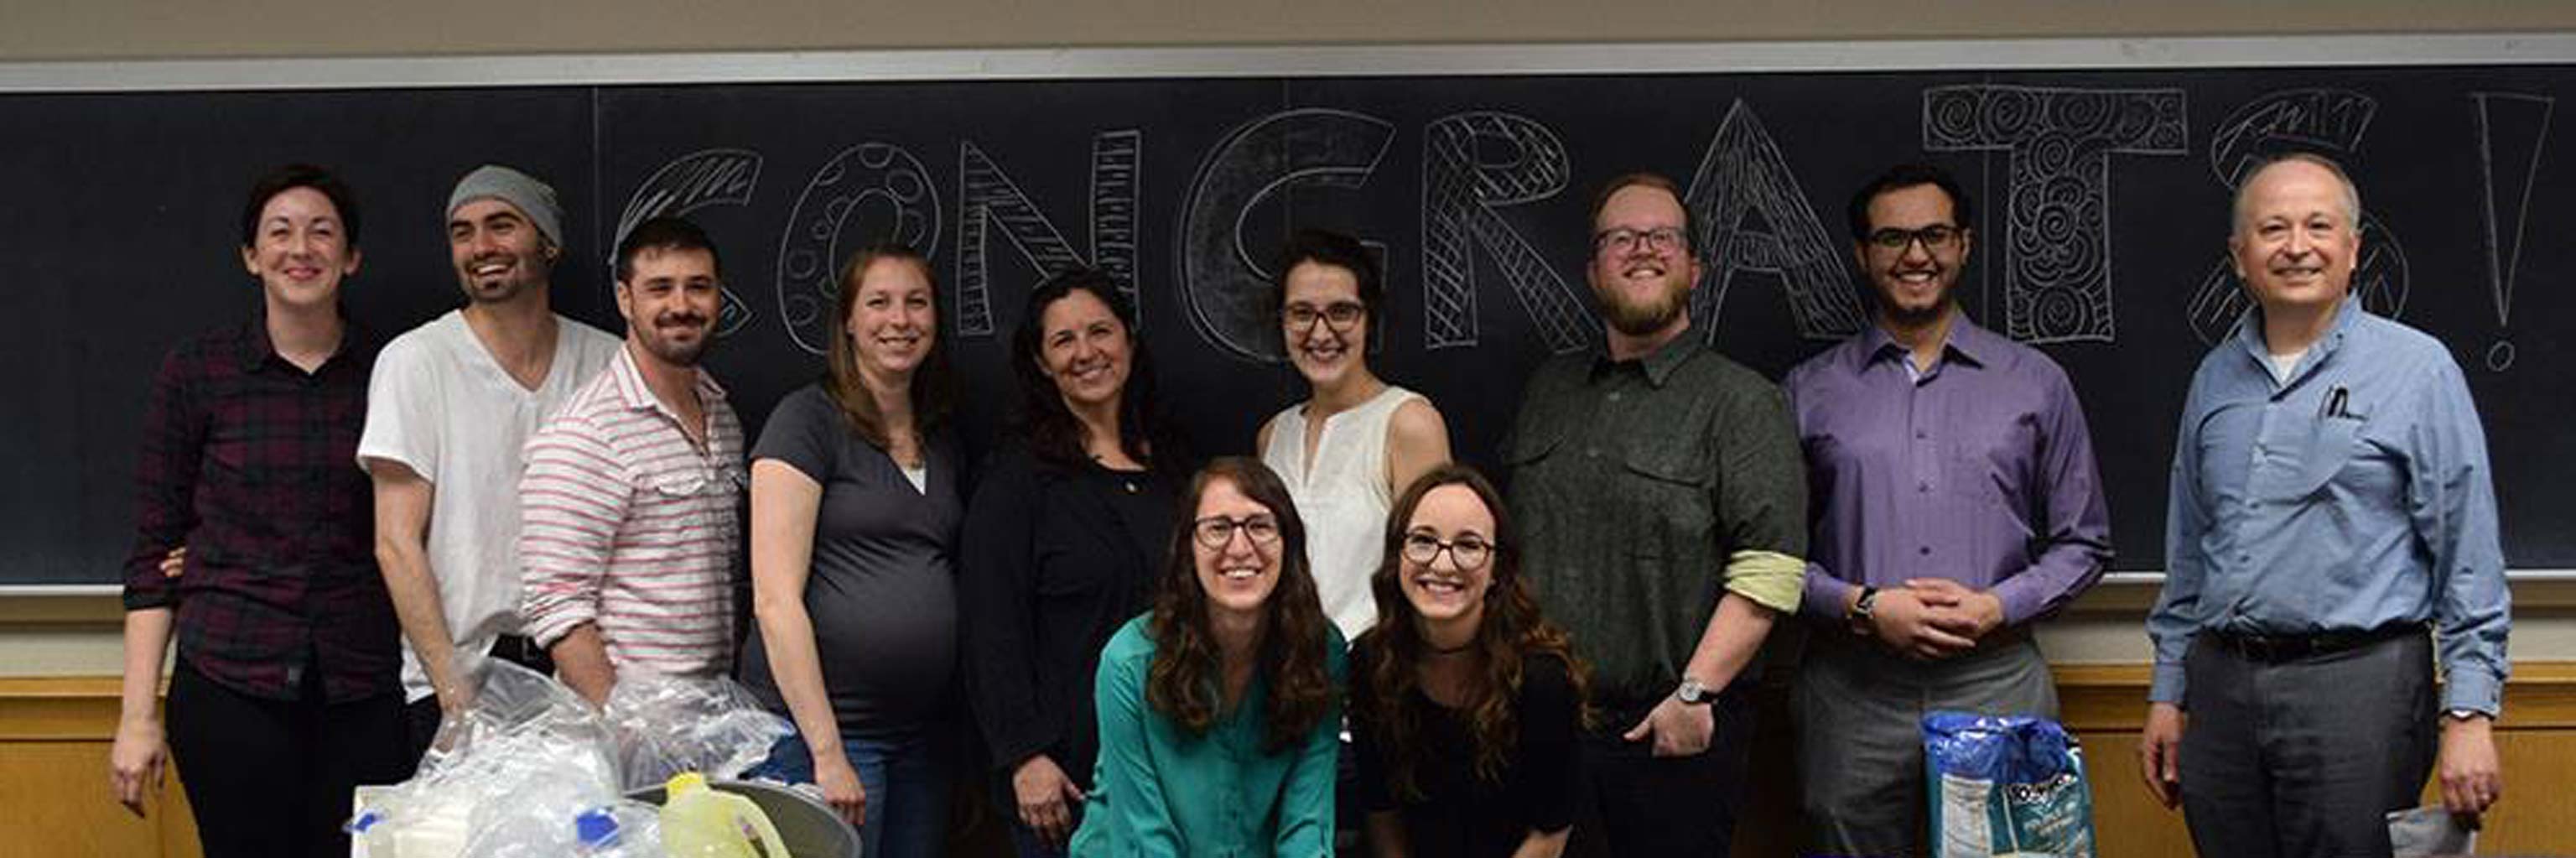 11 SLS faculty standing in front of a chalkboard that says "CONGRATS!"